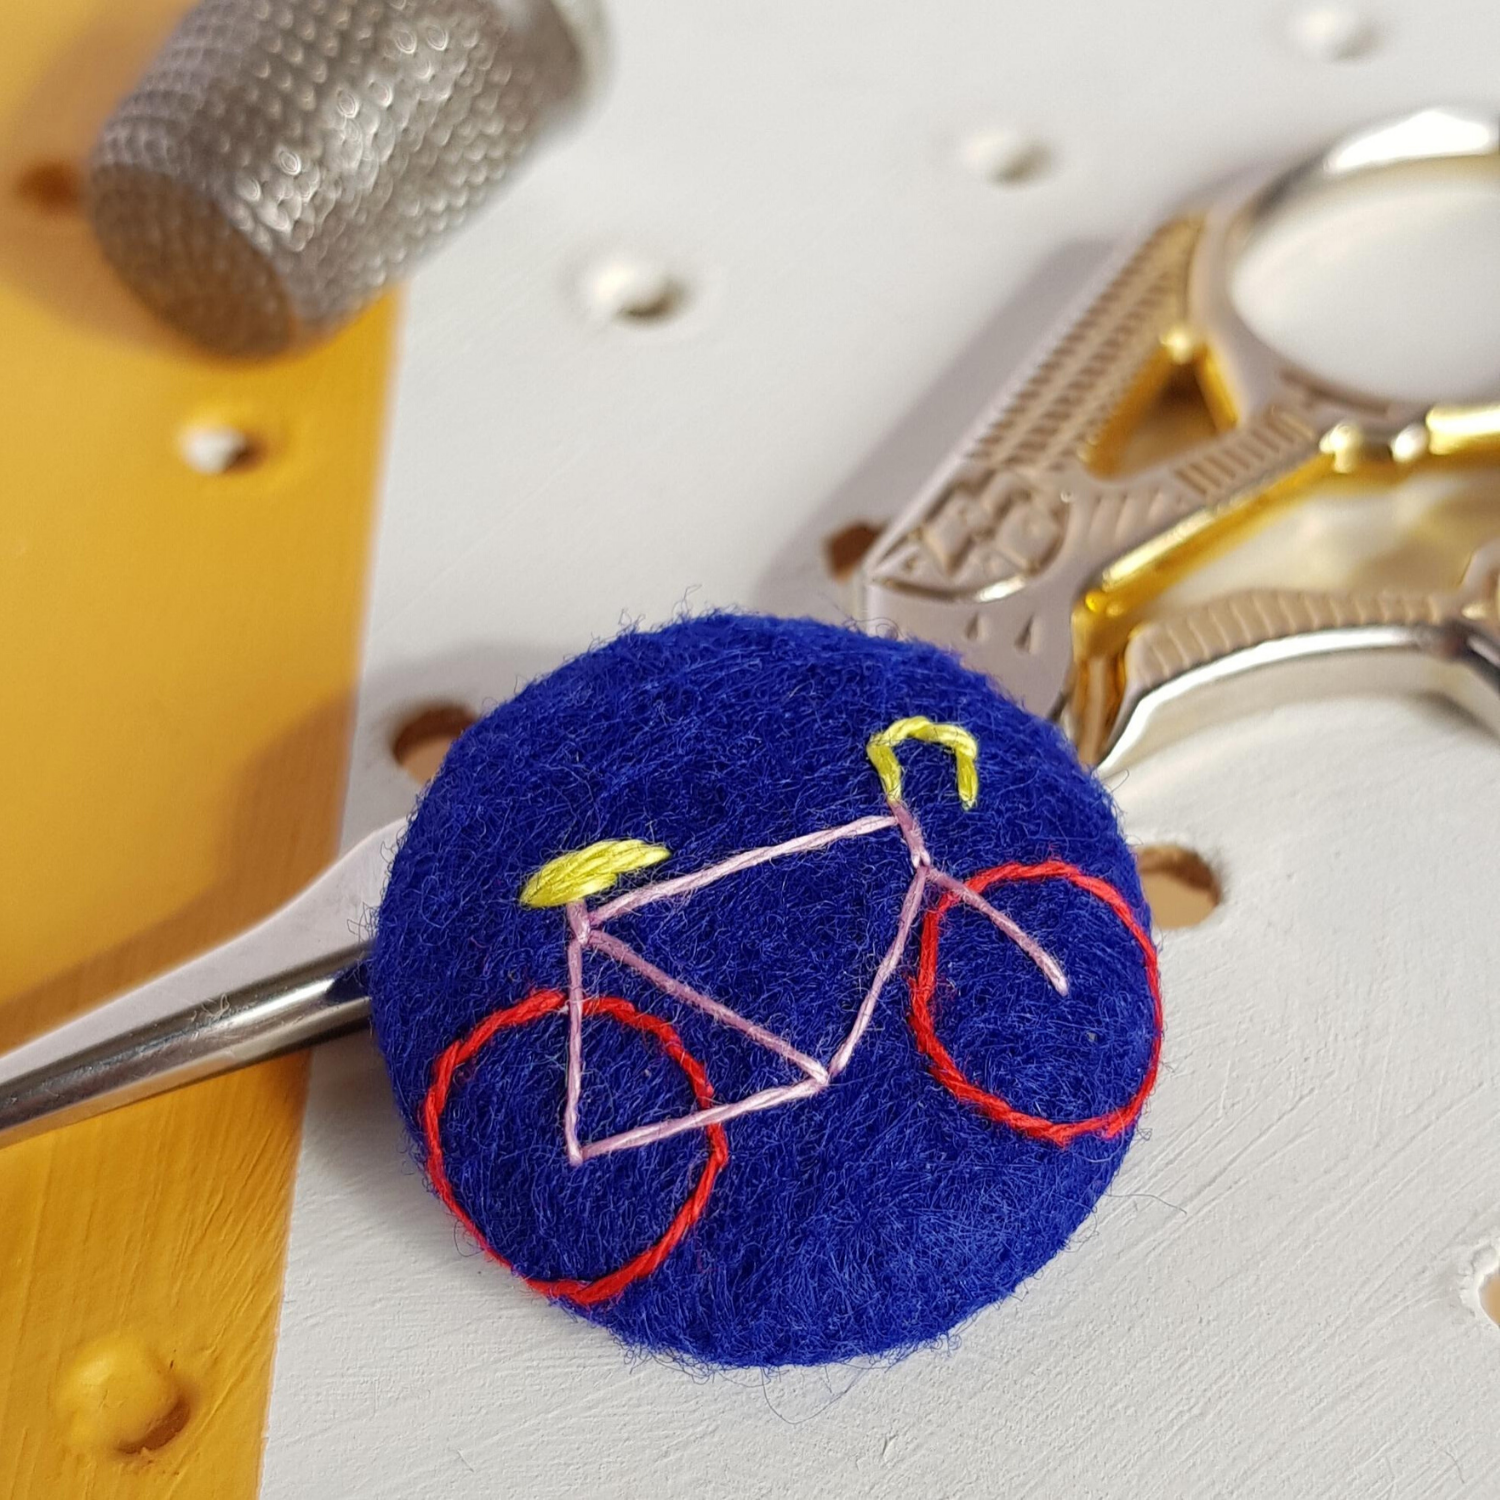 embroidered bicycle on blue felt badge